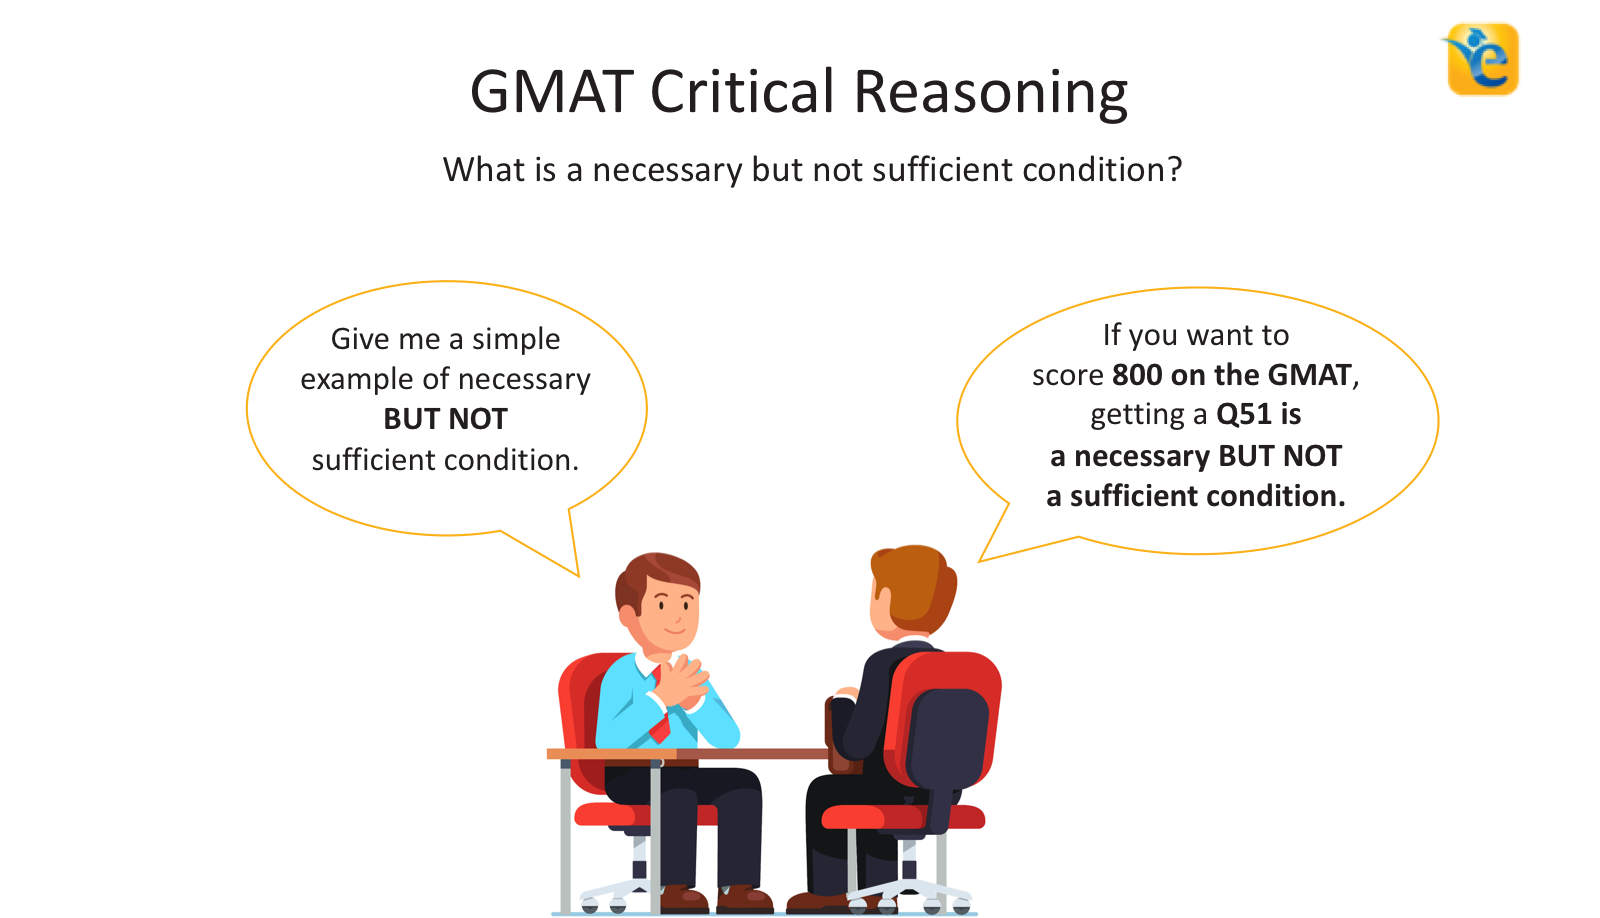 GMAT Critical Reasoning | Necessary but not sufficient condition